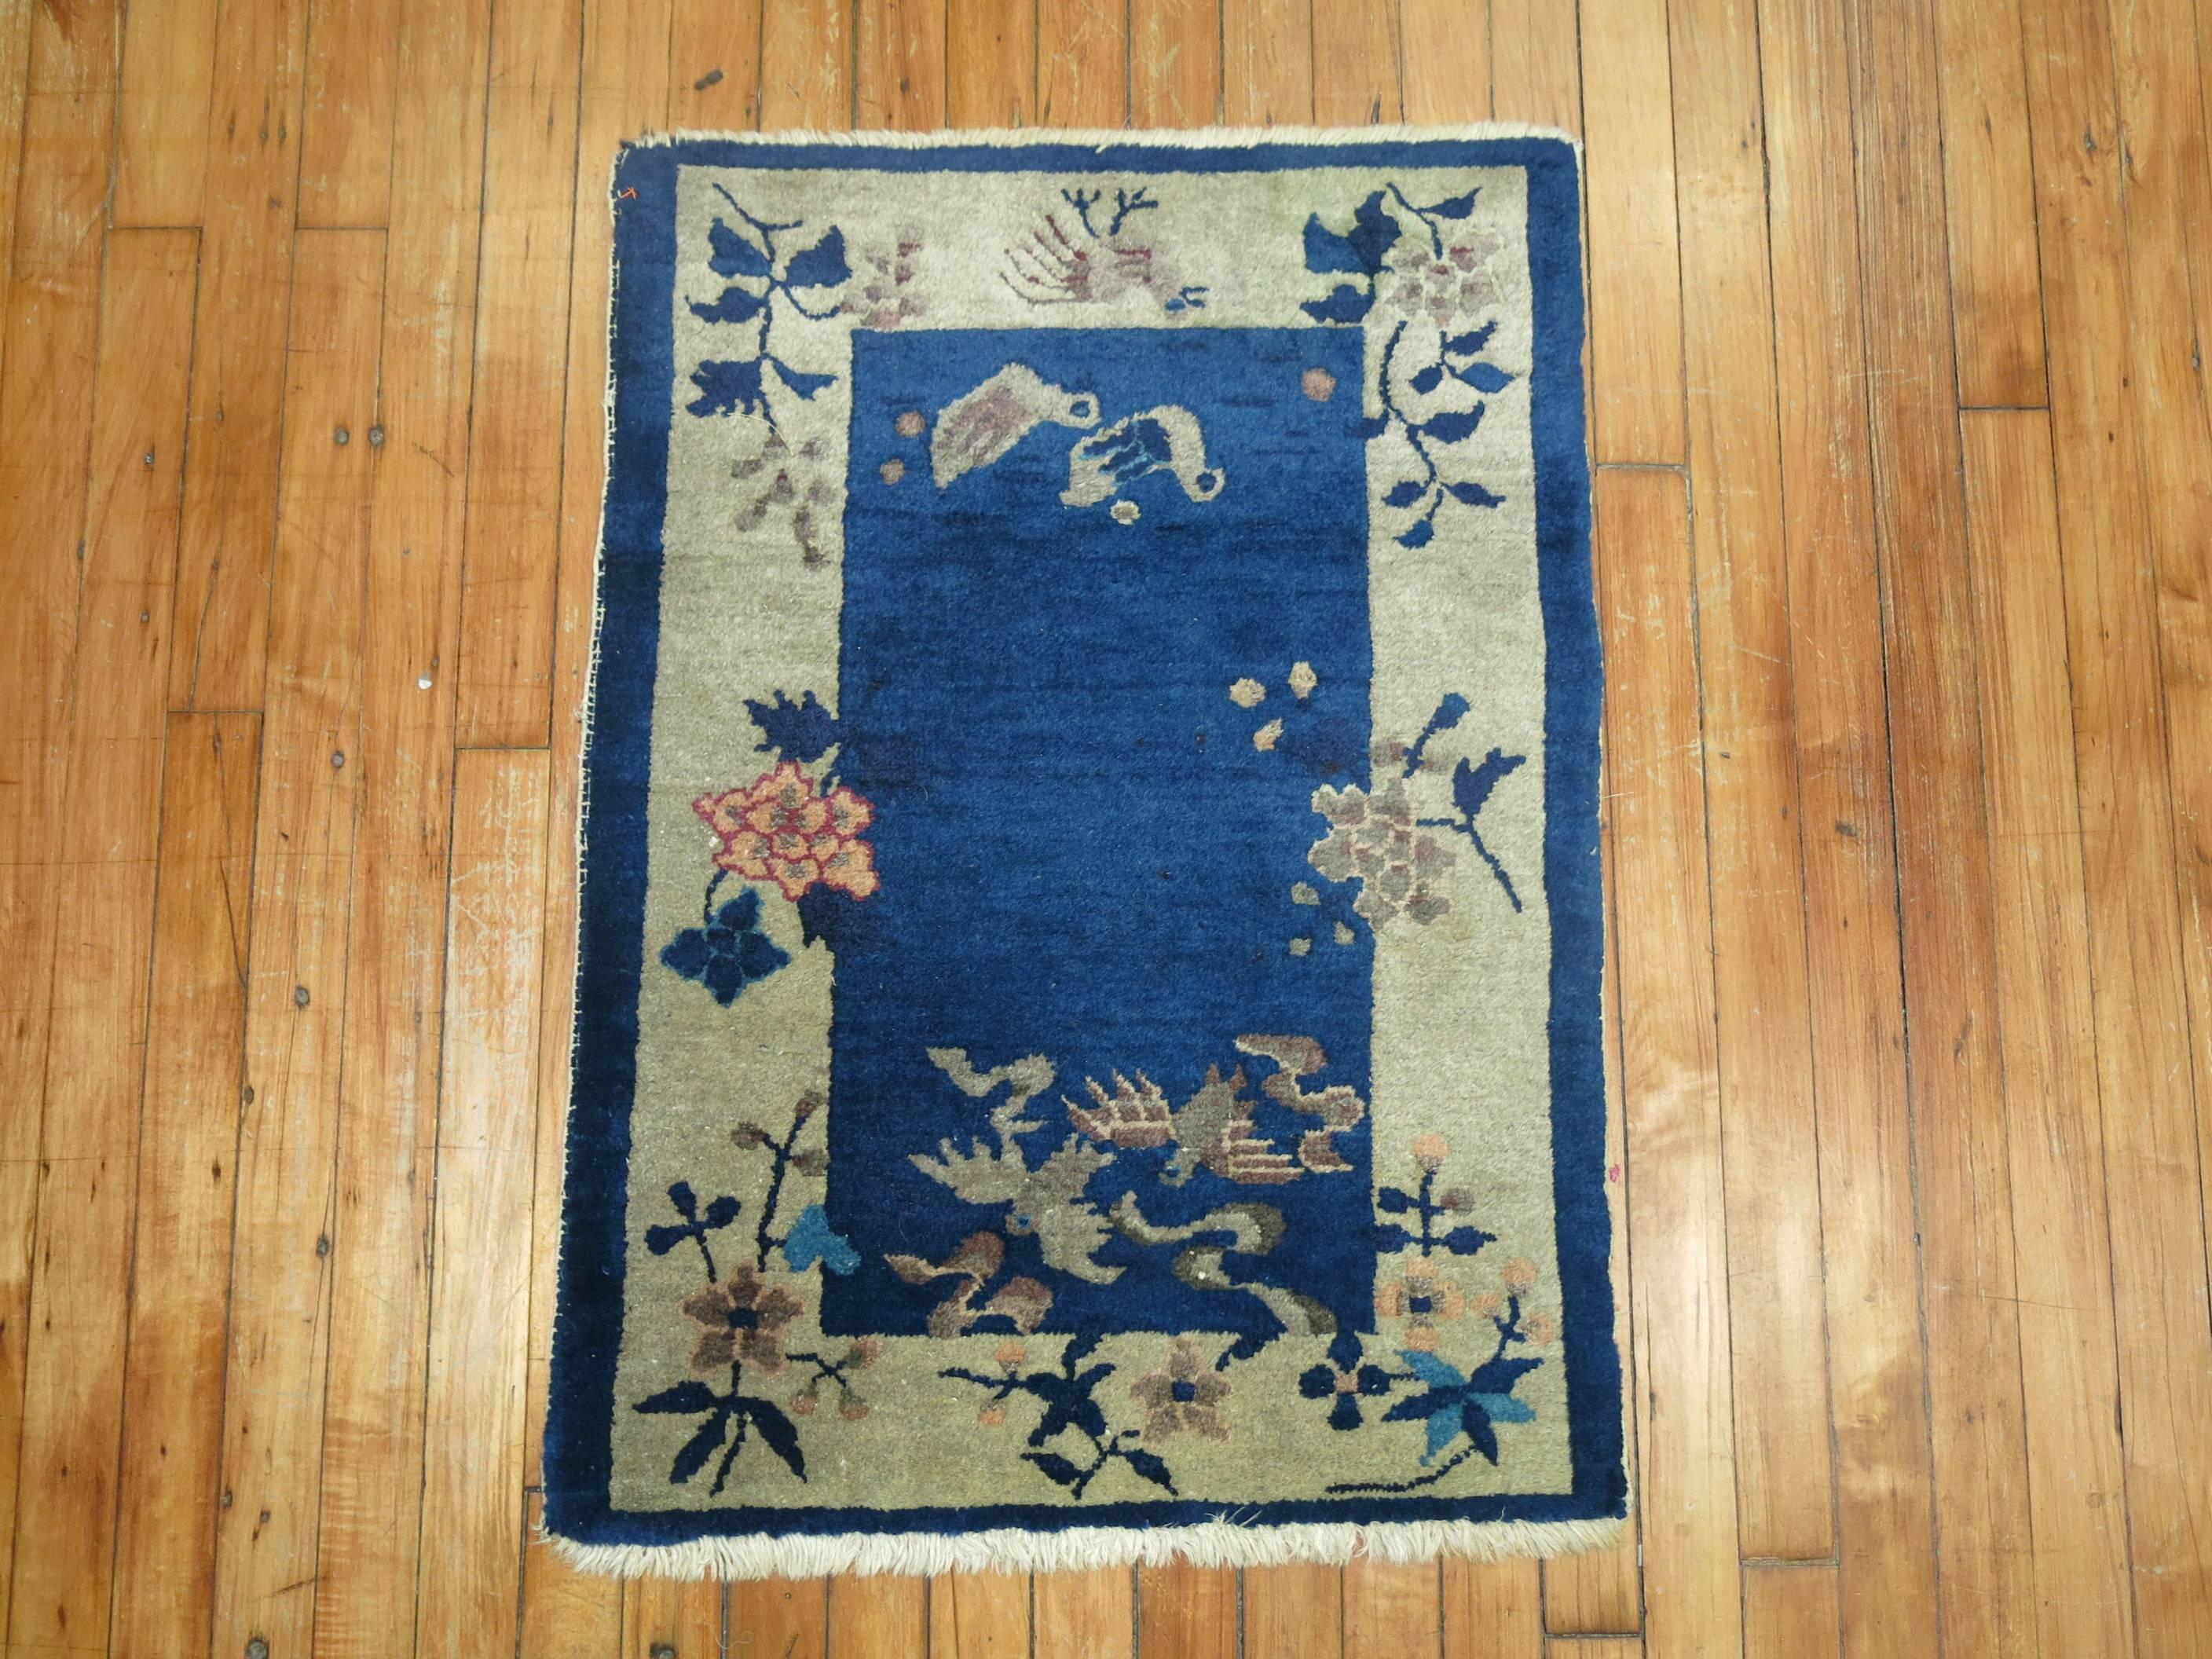 Chinese Art Deco mat in stunning shade of blue.